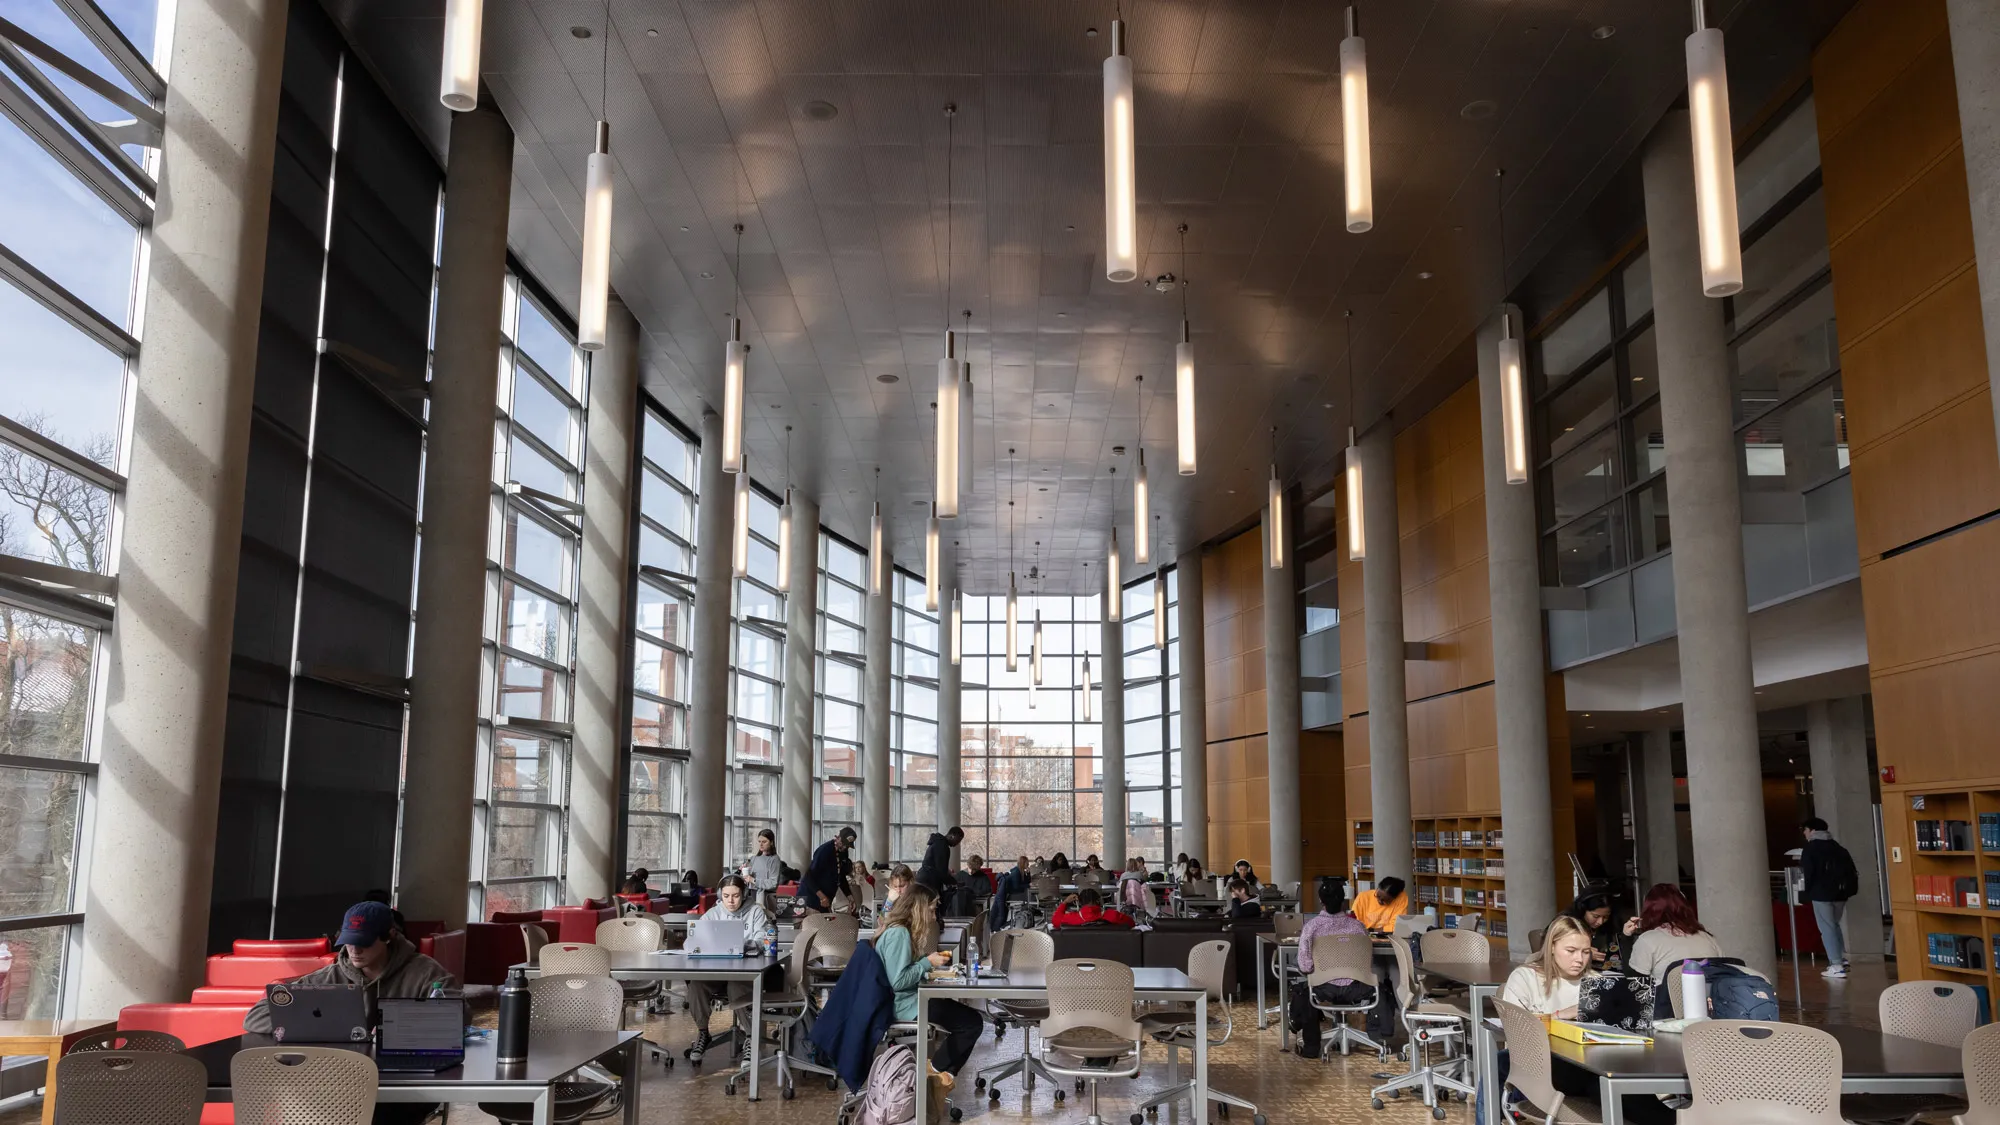 A crowded room in the library has modern, tall and slim lights—at least 20 of them—hanging from the ceiling; walls made of glass paneled windows or sleek wood and columns; and a floor covered in embossed text. The letters are hand-sized. More students than can be counted study at sleek tables in plastic rolling chairs. 